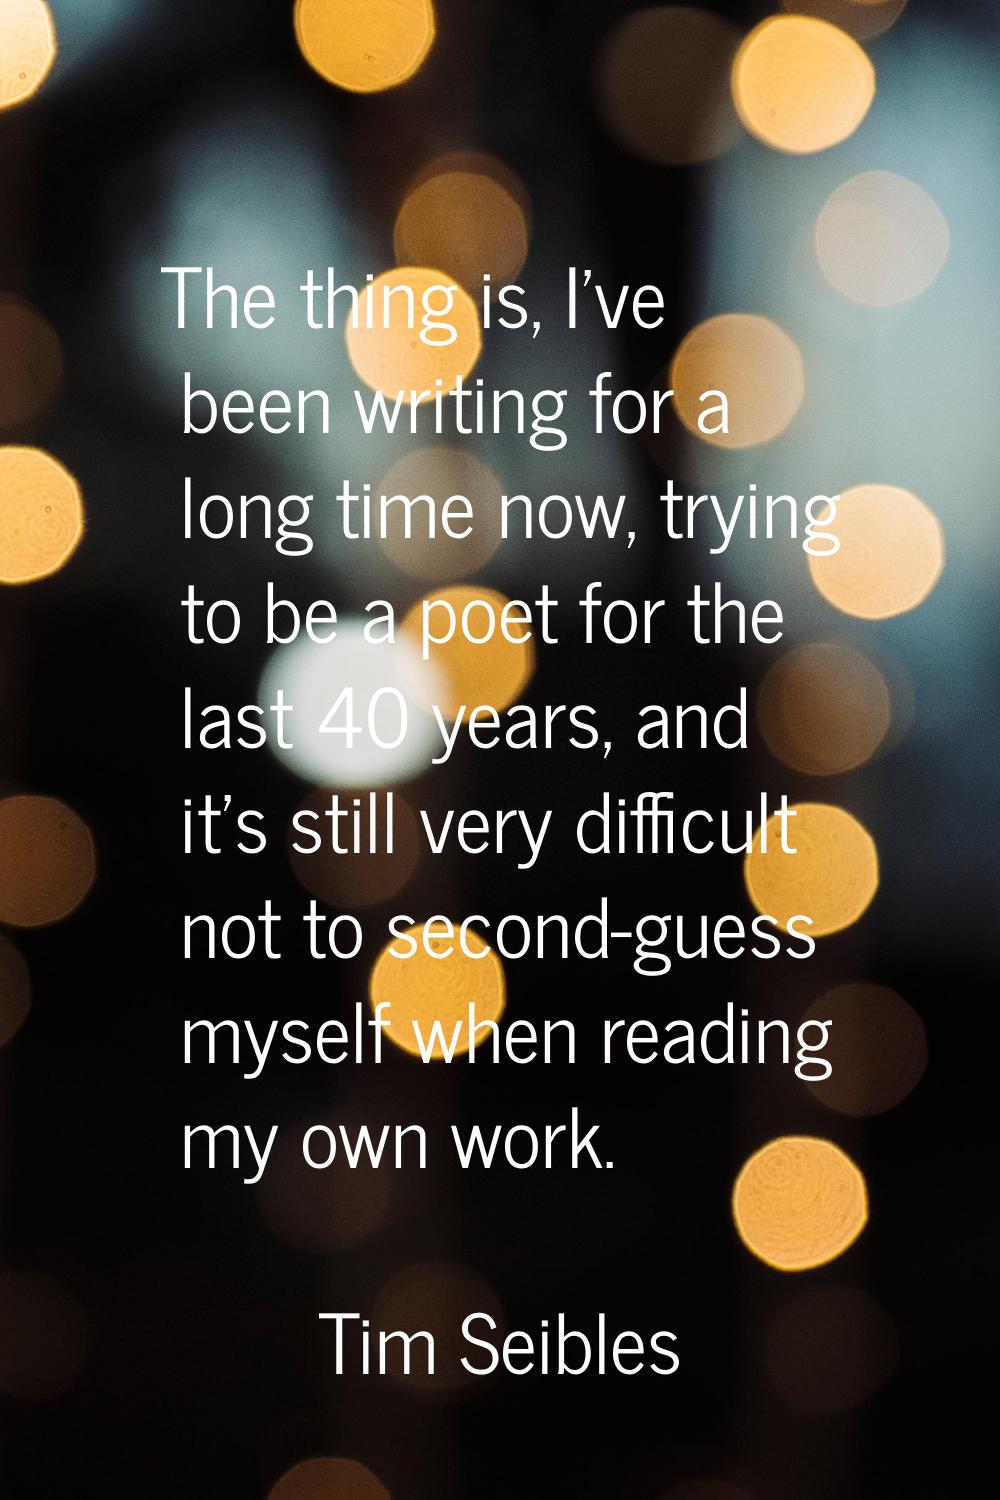 The thing is, I've been writing for a long time now, trying to be a poet for the last 40 years, and